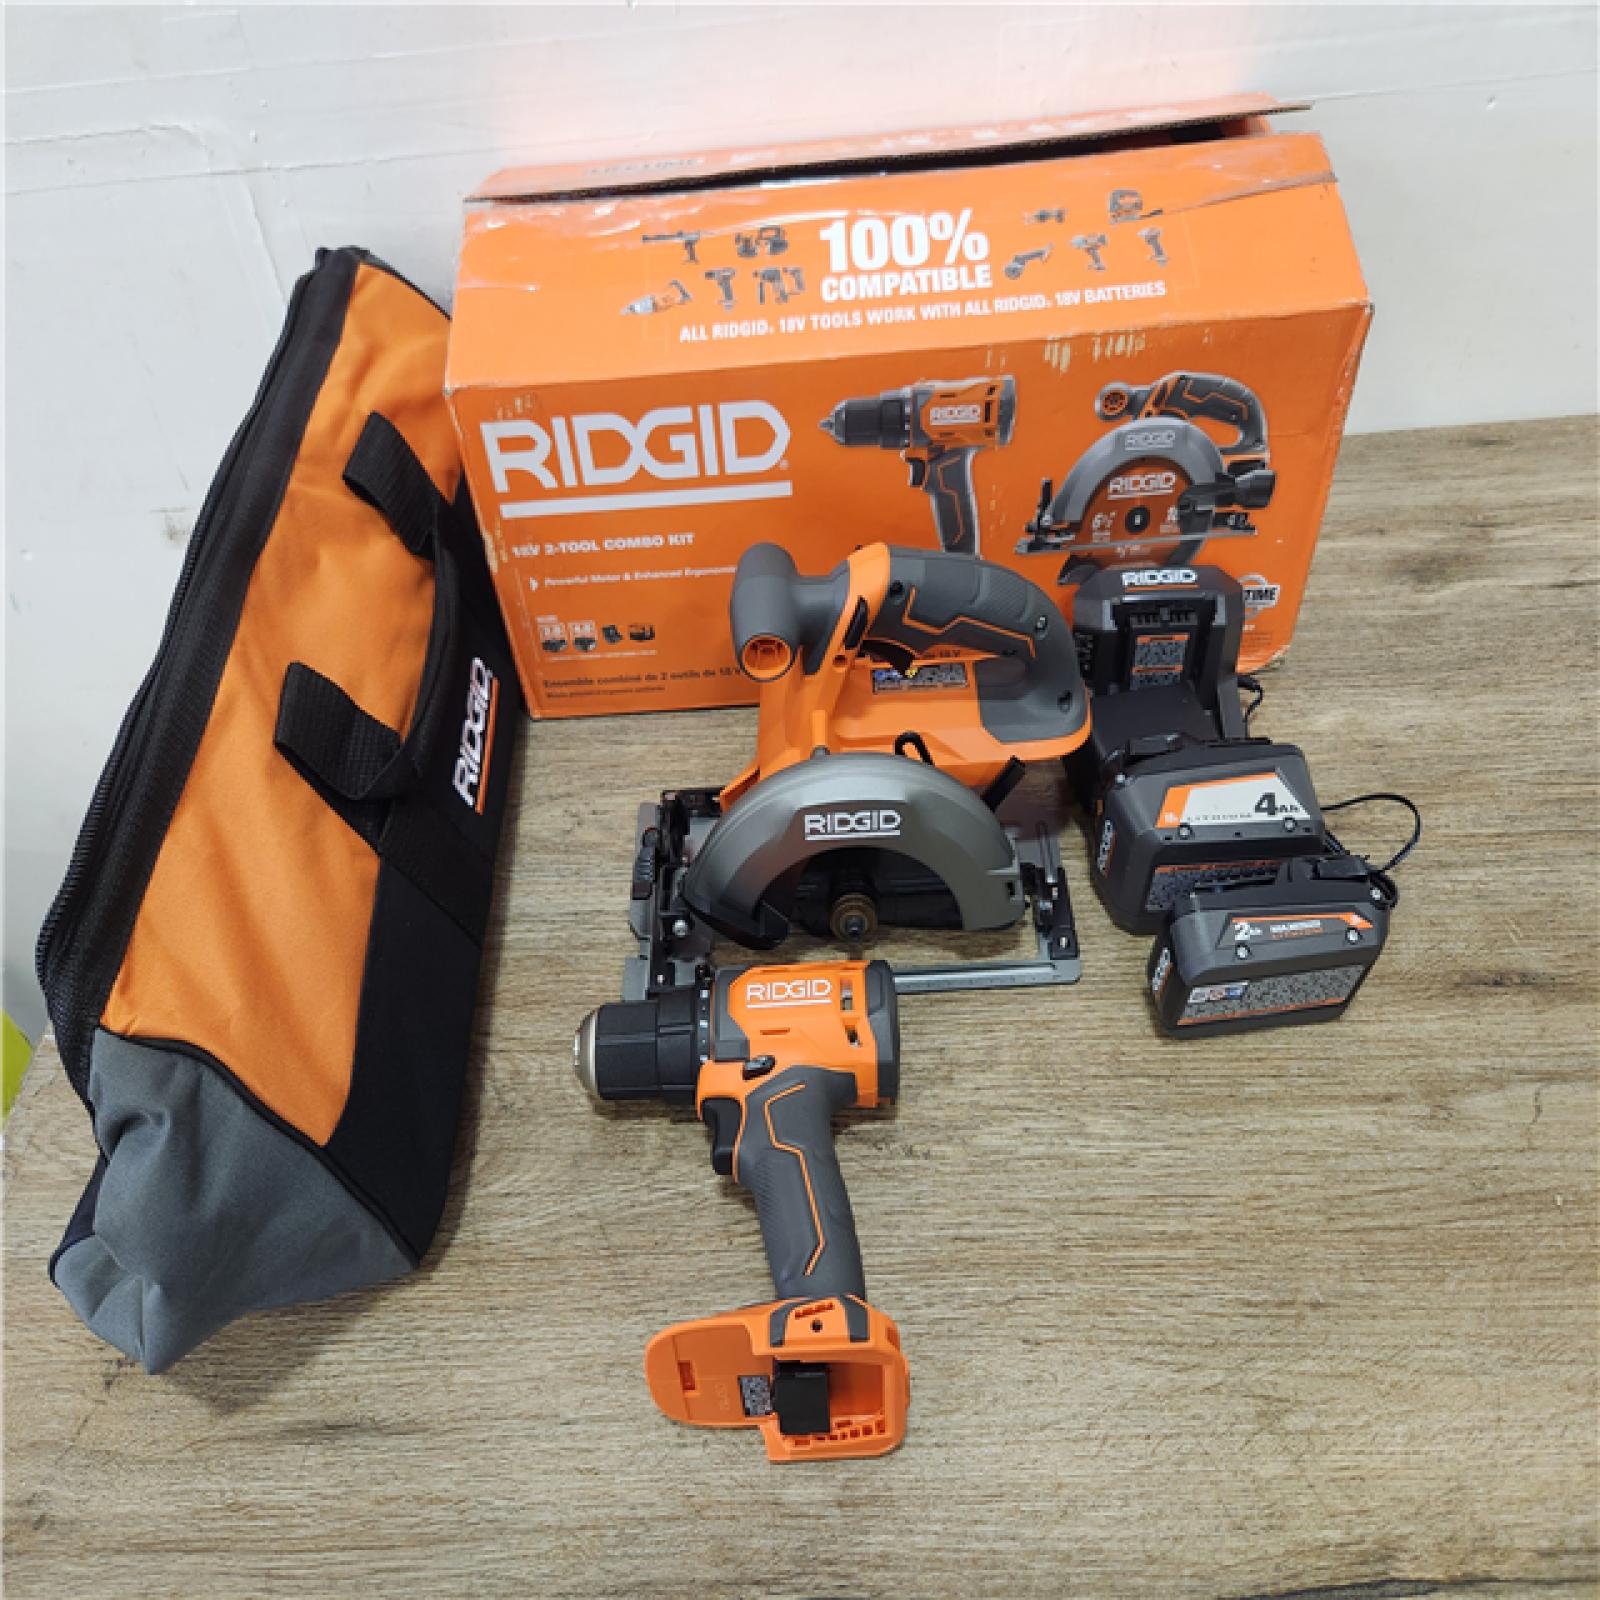 Phoenix Location NEW RIDGID 18V Cordless 1/2 in. Drill/Driver and 6-1/2 in. Circular Saw Combo Kit with 2.0 Ah and 4.0 Ah Battery, Charger, and Bag